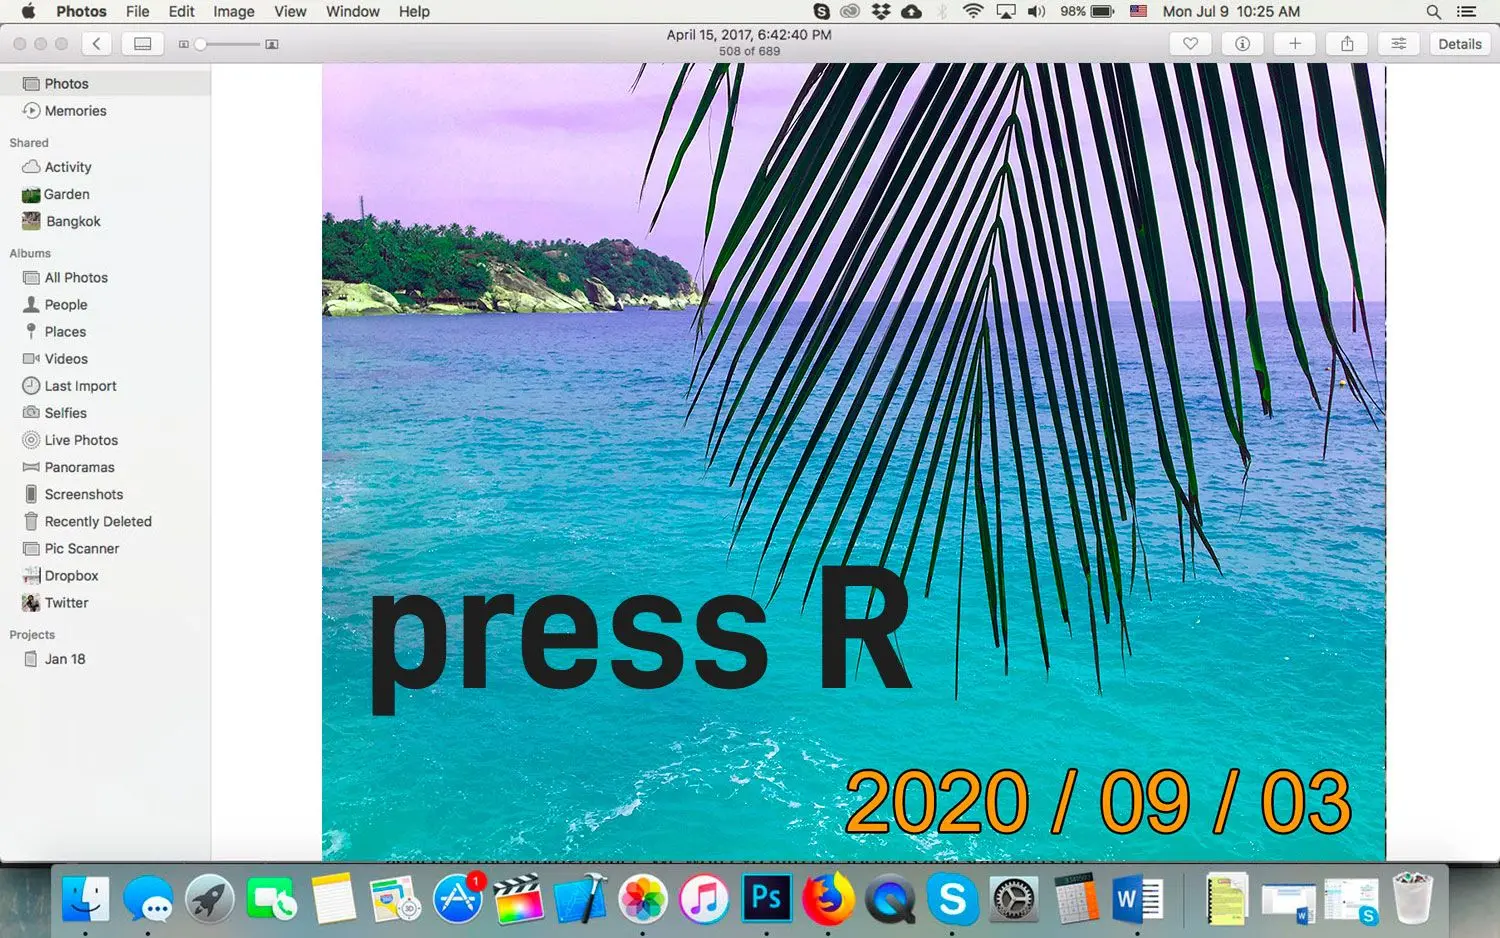 Removed date stamp on Mac OsX Photos..